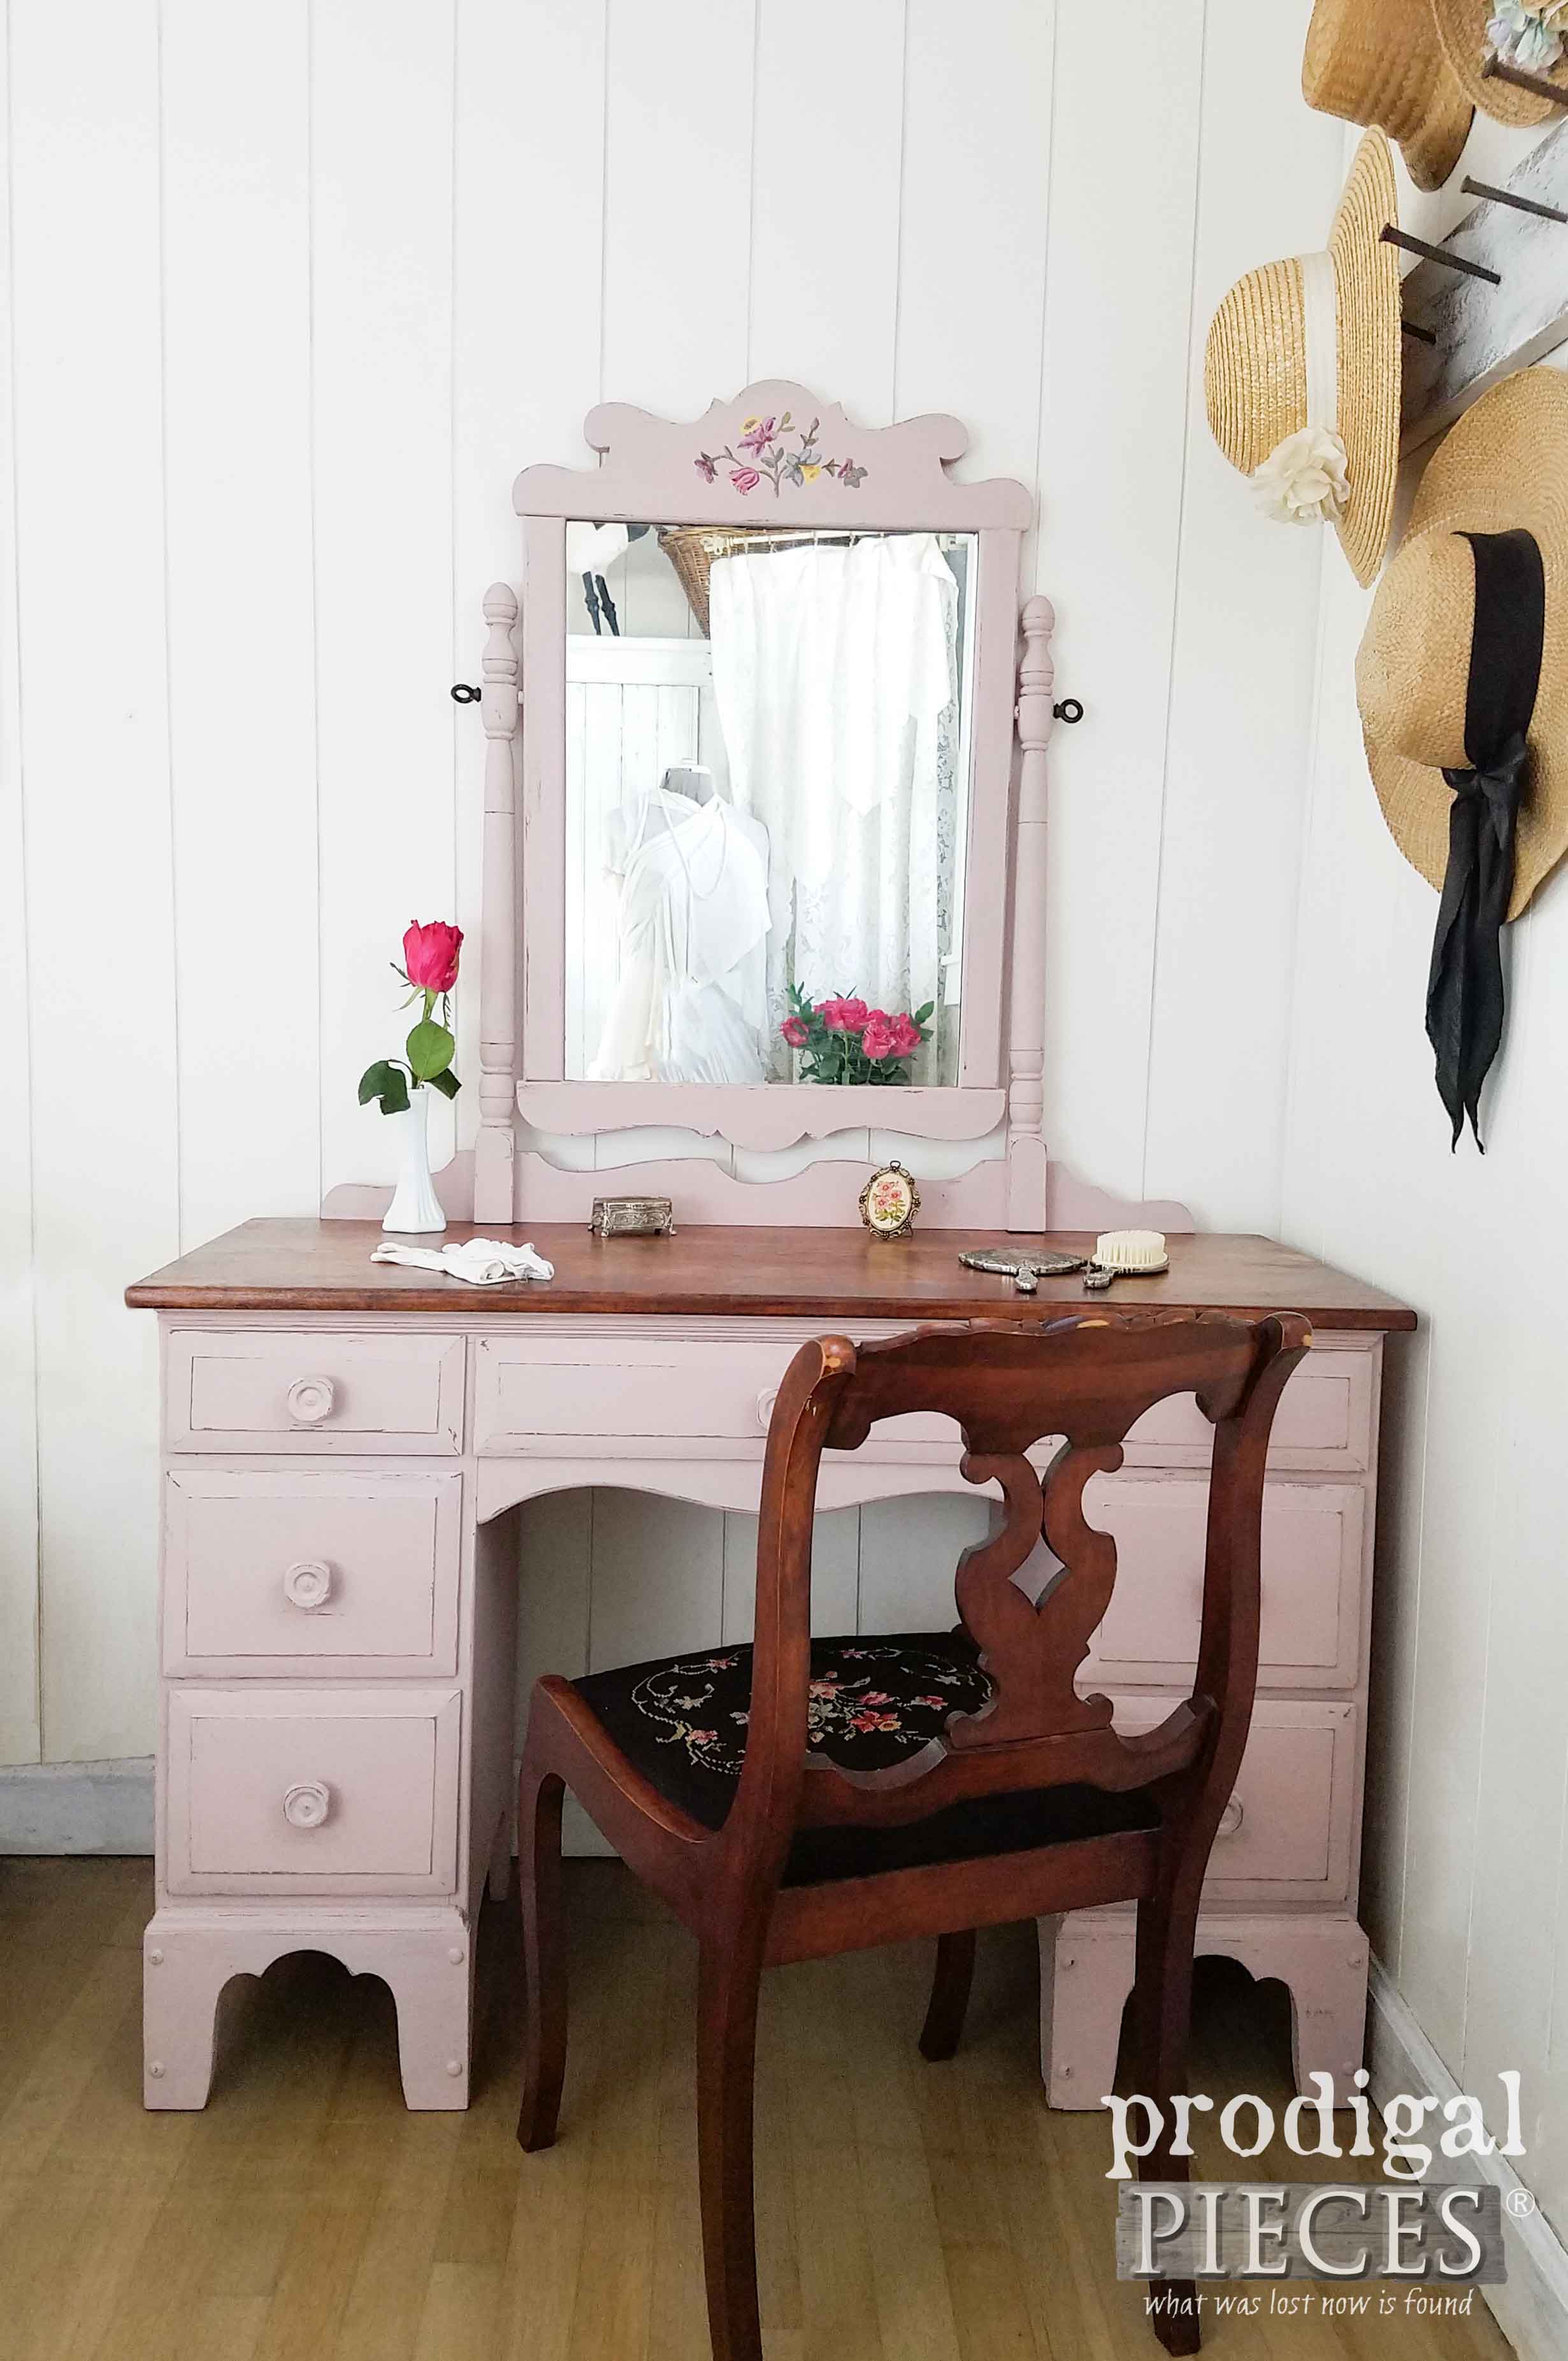 Simply Chic Vintage Vanity Painted Tea Rose Pink by Prodigal Pieces | prodigalpieces.com